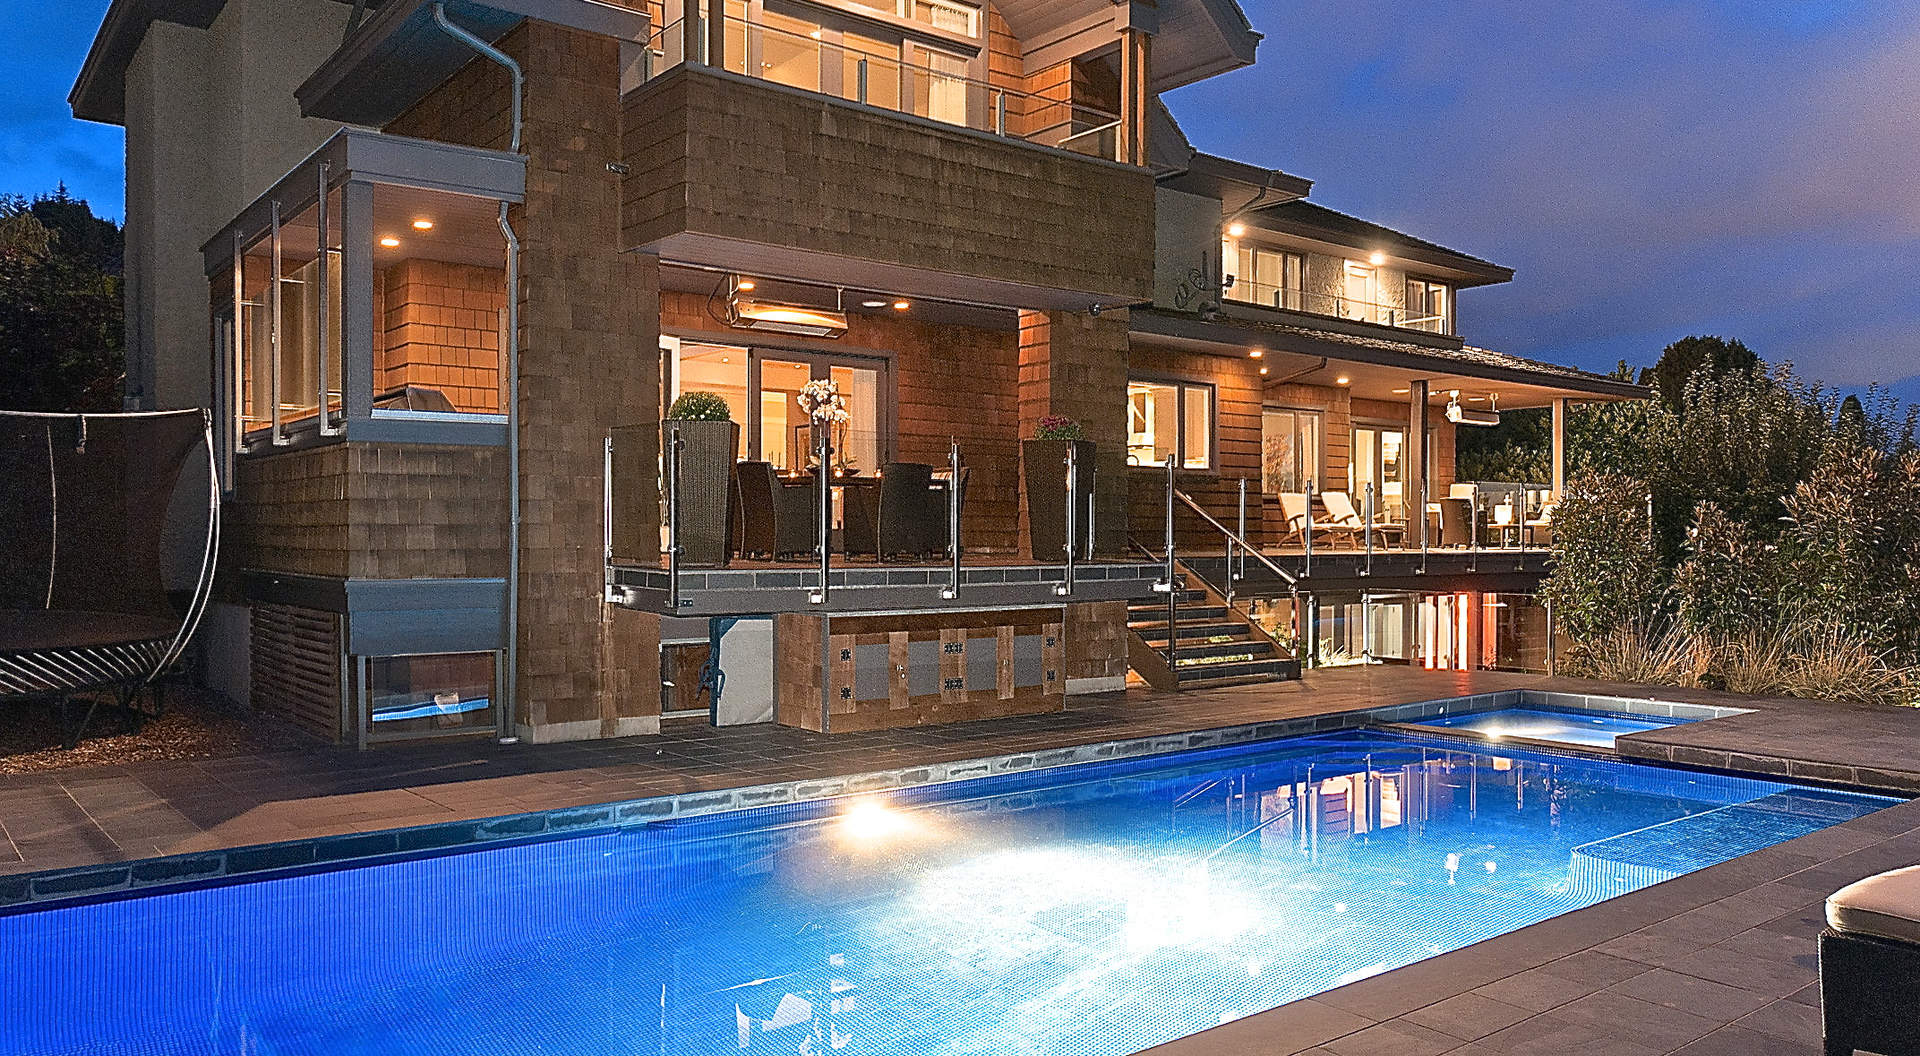 A Sparkling Outdoor Pool and Hot Tub